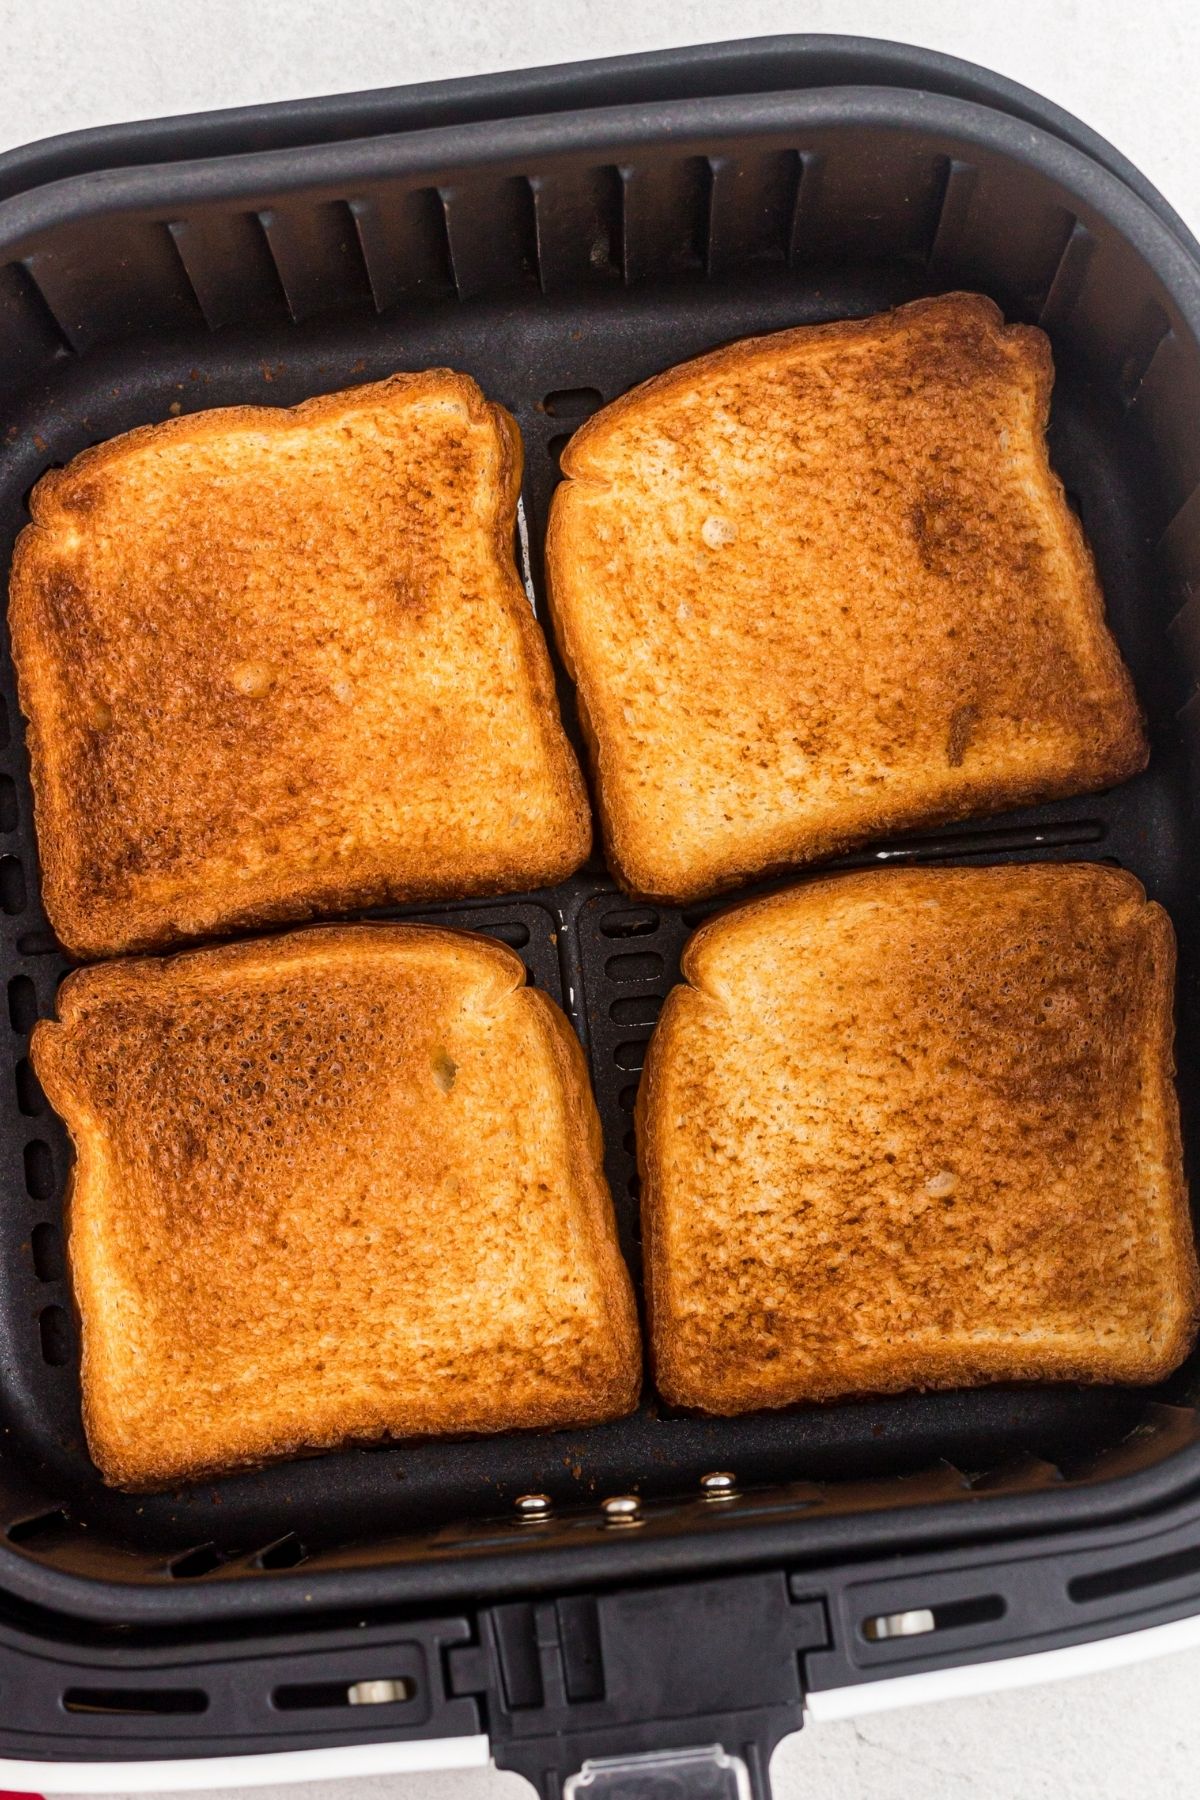 Four slices of golden toast after being cooked in the air fryer basket